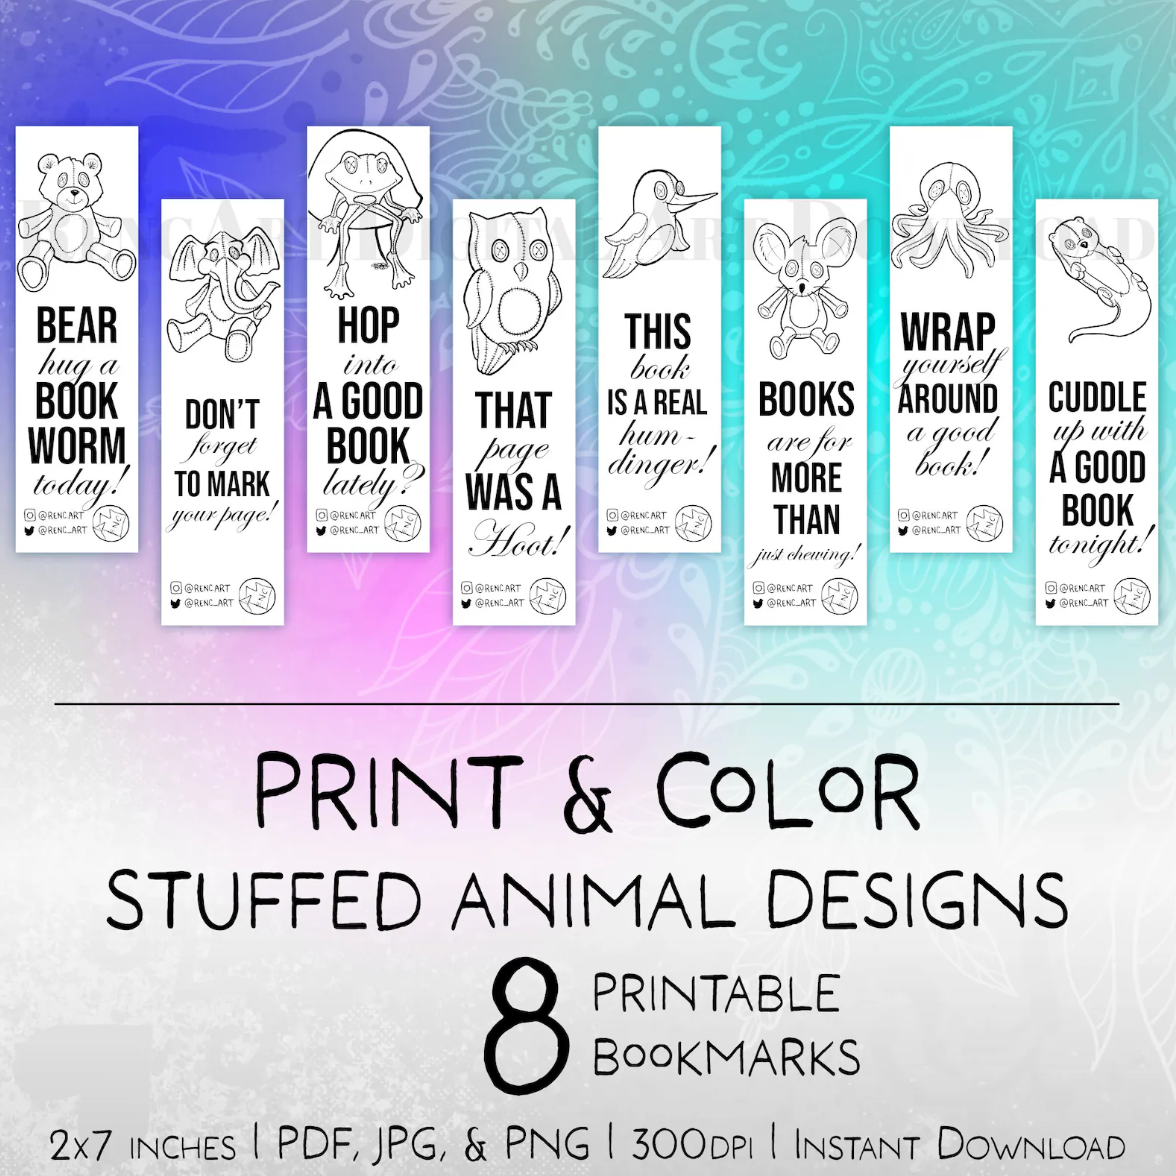 Print and Color Bookmarks - Digital Download - Stuffed Animal Designs